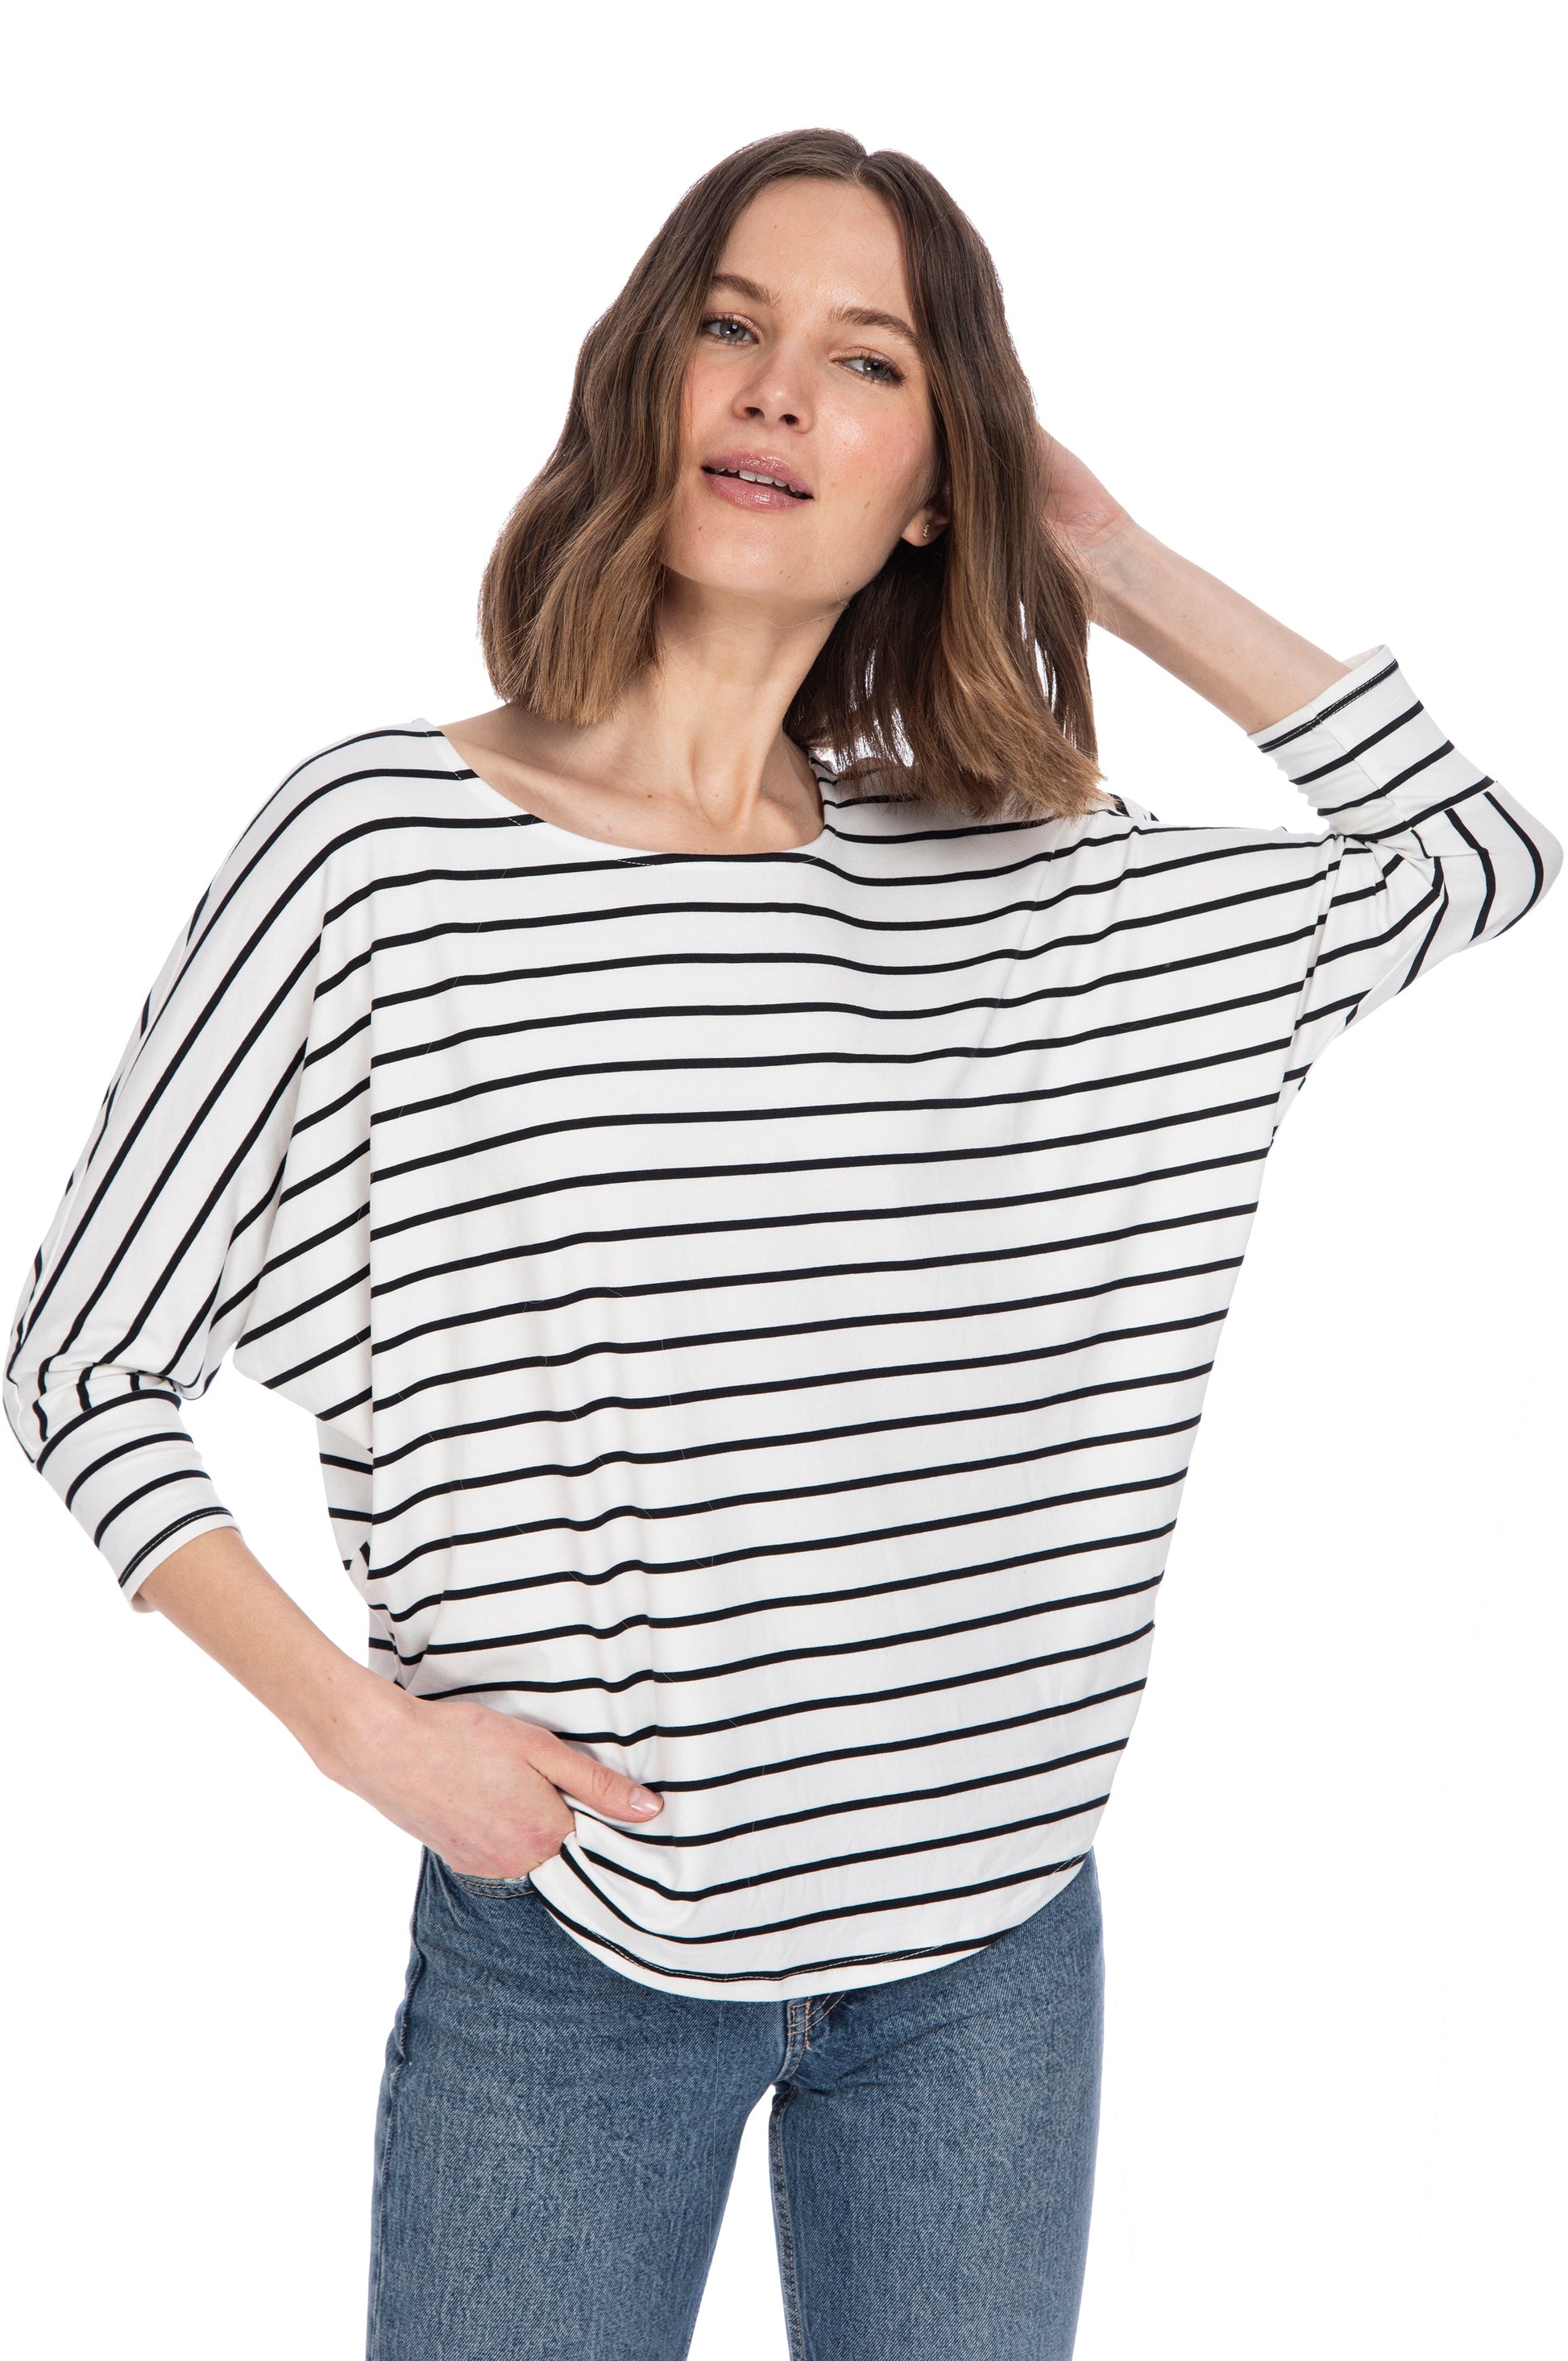 A woman in a casual pose wearing a black and white striped 3/4 SLV DOLMAN BUTTER TOP by B Collection by Bobeau and blue jeans against a white background.